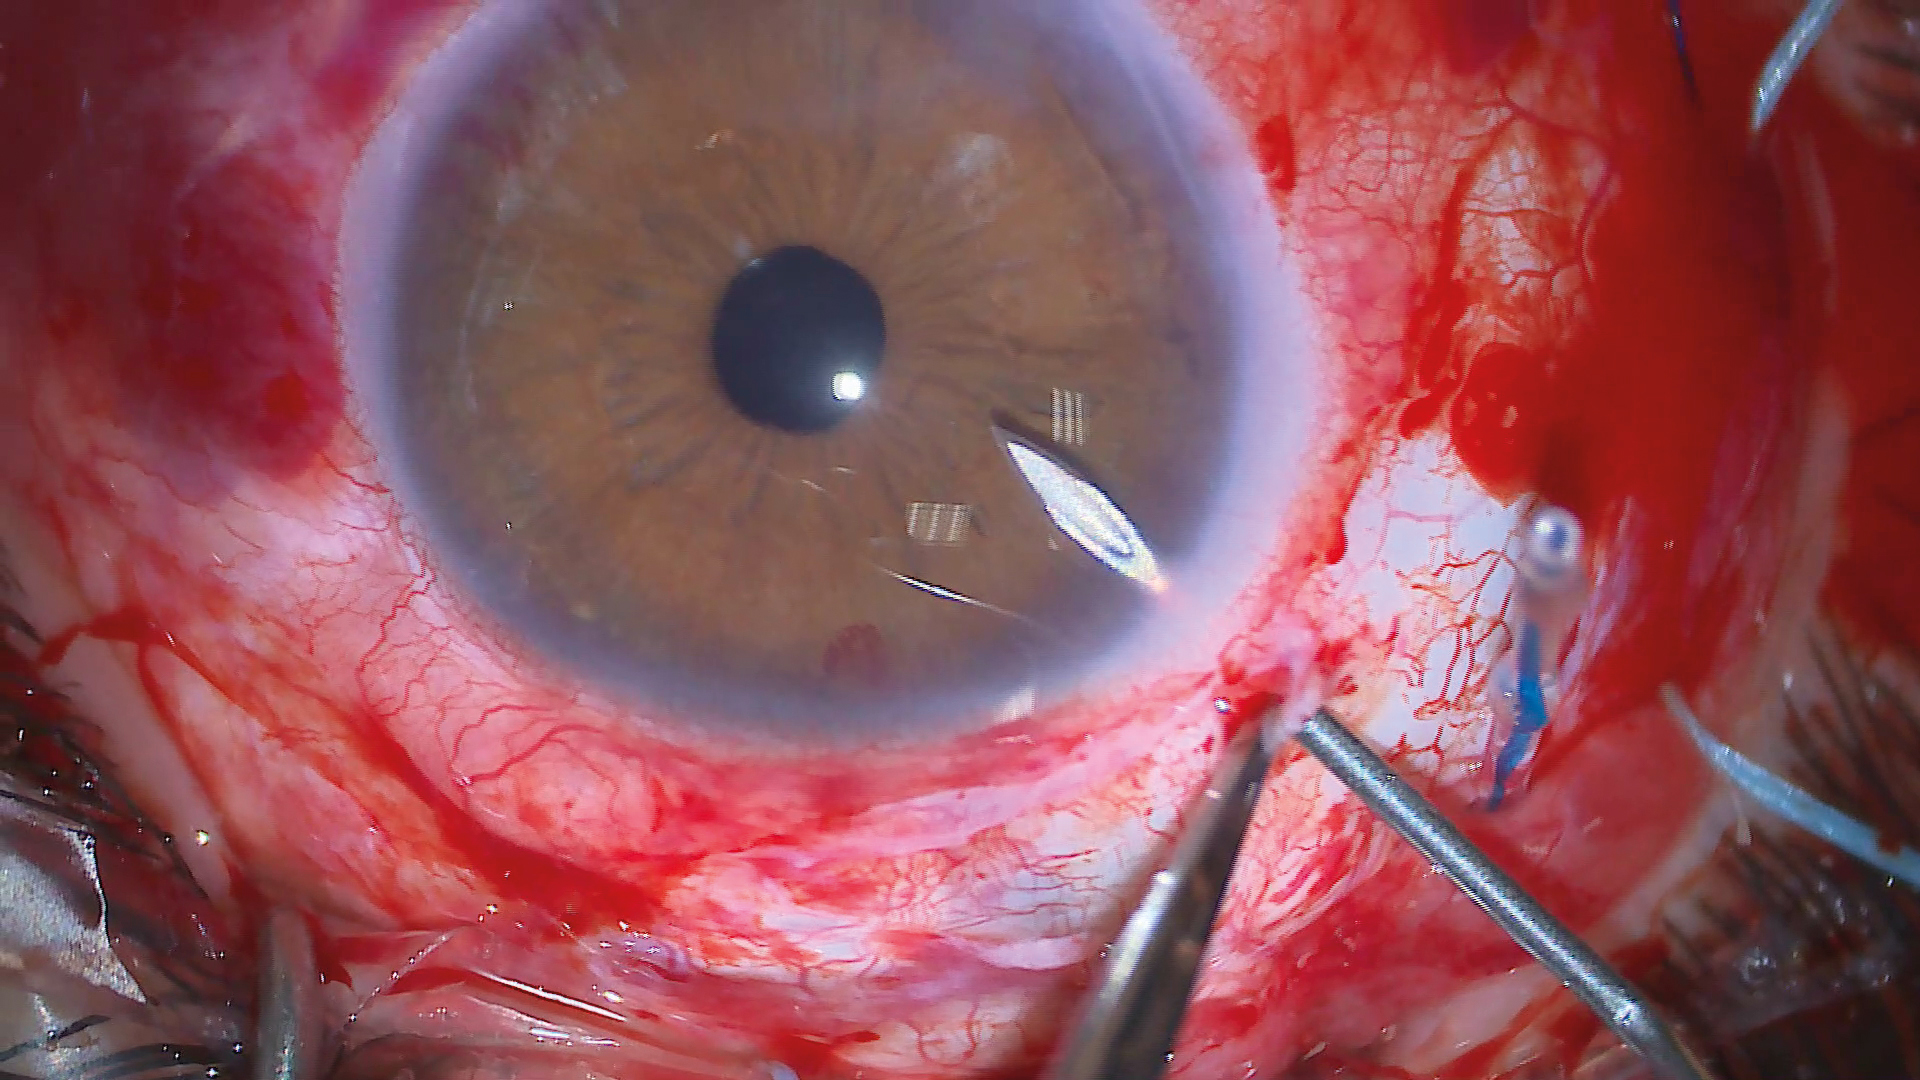 Image of a Glaucoma Surgery with a Leica Ophthalmic Microscope